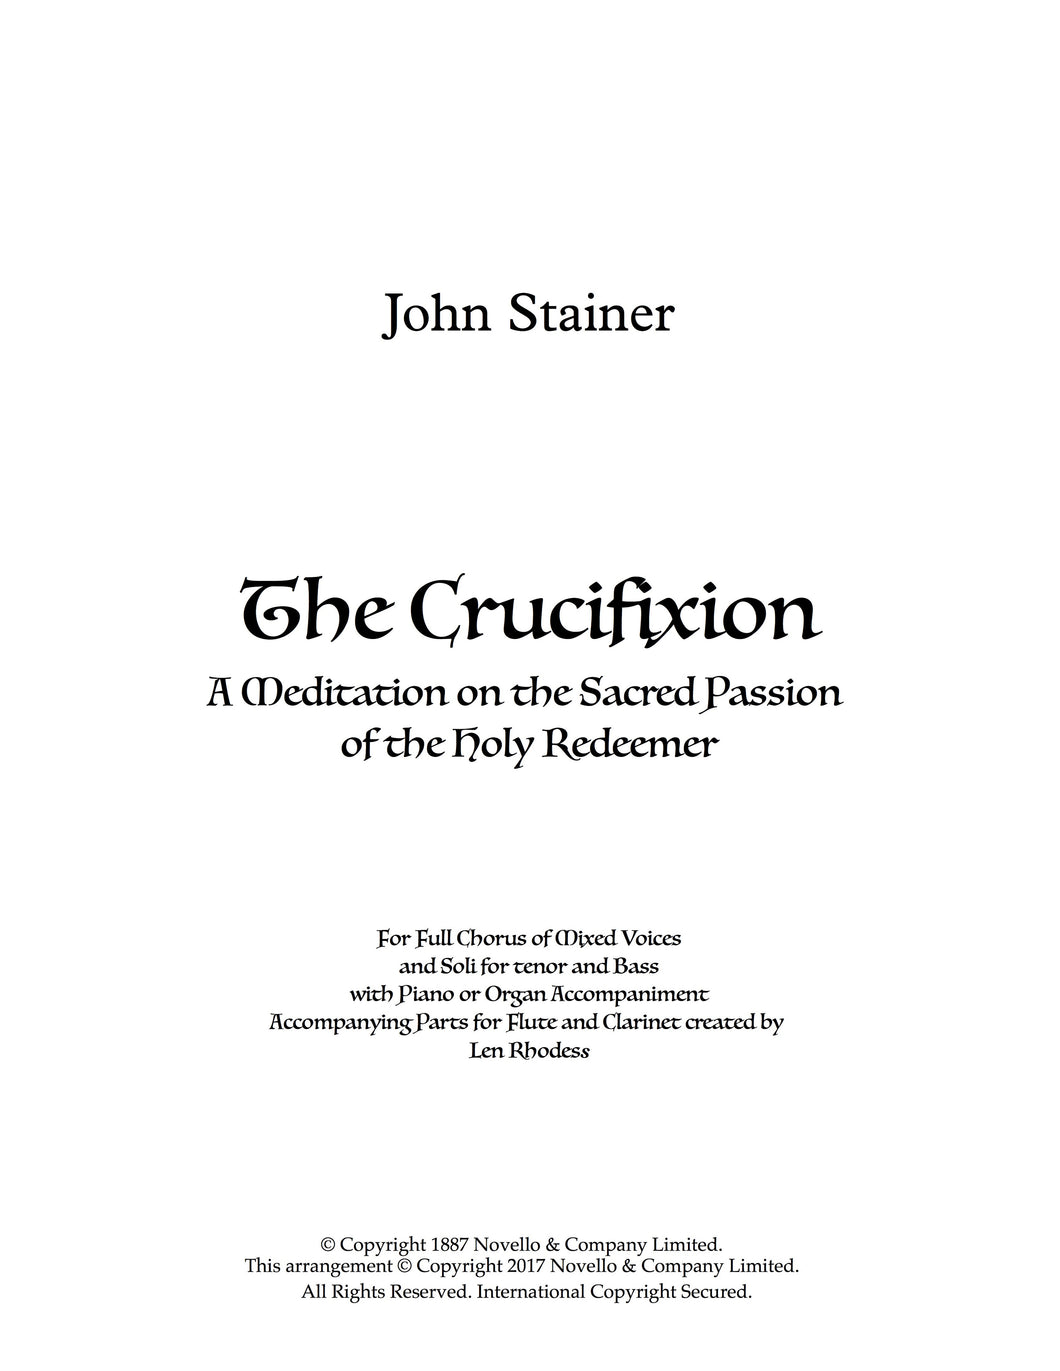 The Crucifixion, Stainer - accompanying parts for Flute and Clarinet